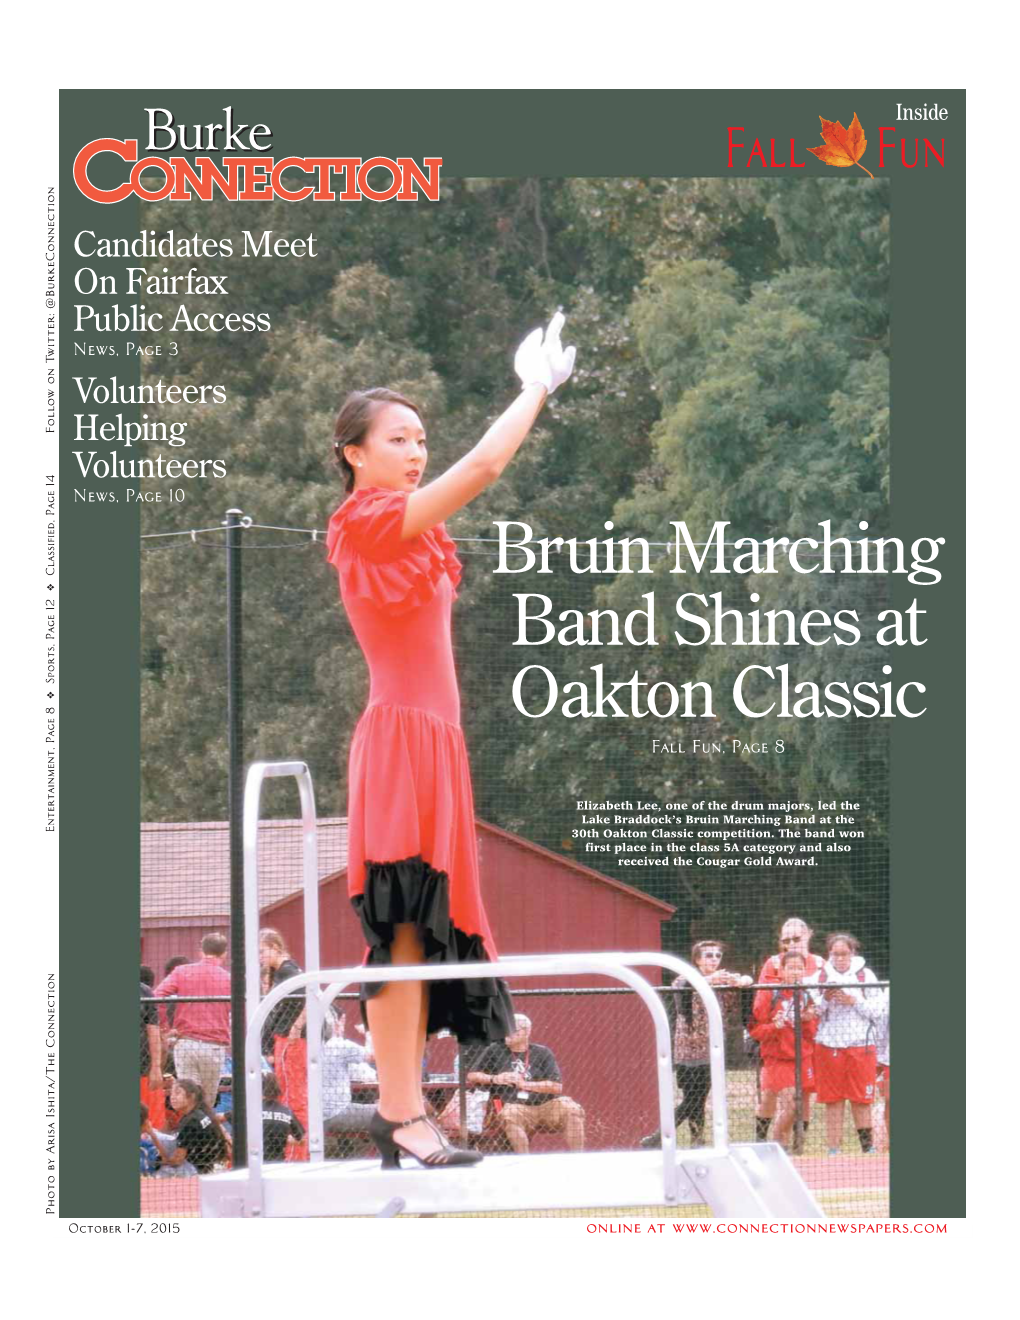 Bruin Marching Band Shines at Oakton Classic an Afternoon with Tim Federle